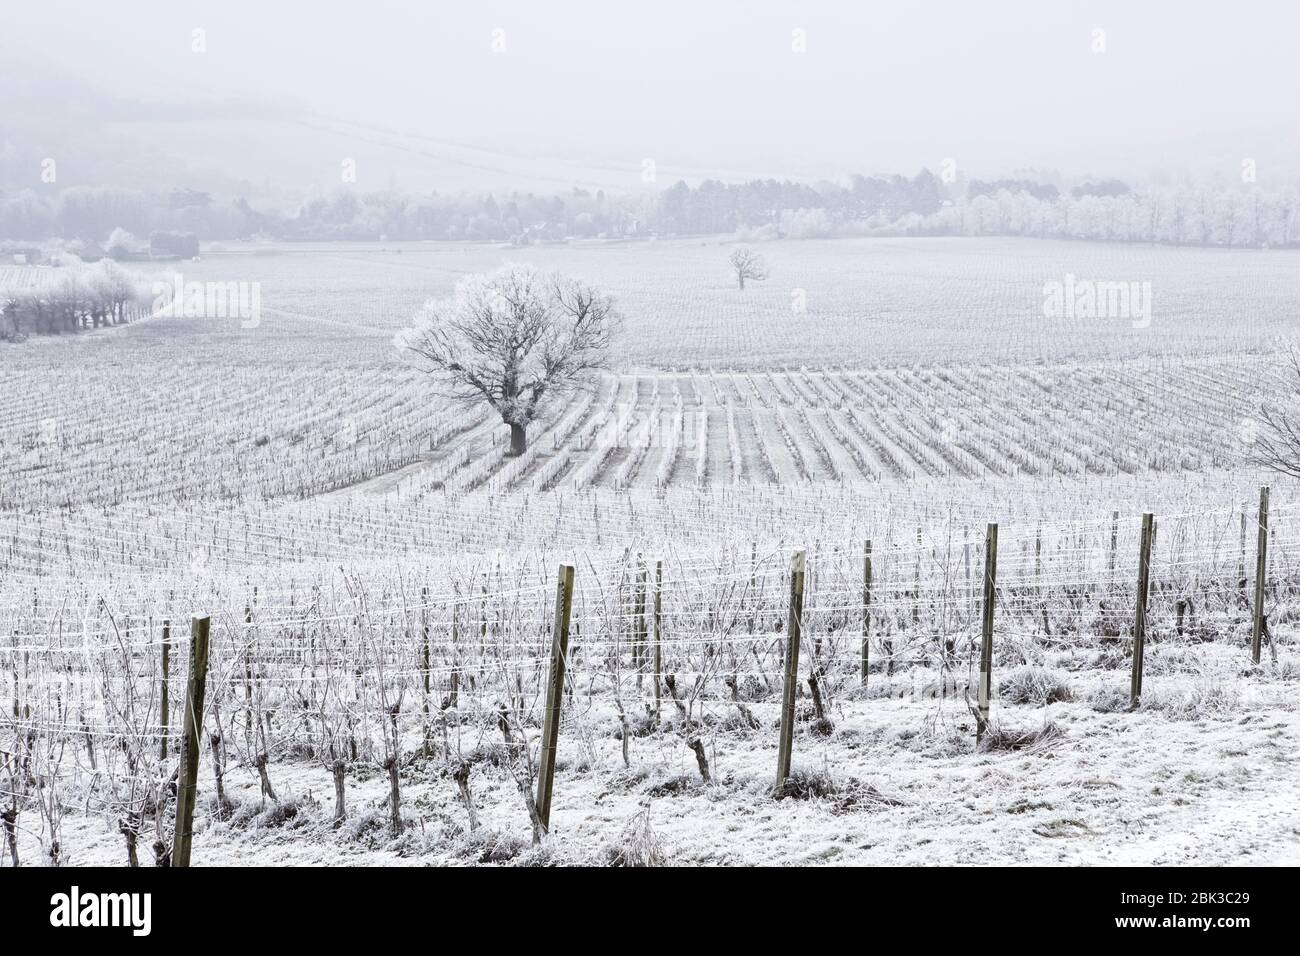 Denbies Wine Estate located in the beautiful Surrey Hills. A rare Hoar frost covers the entire area with a coating of ice. Stock Photo